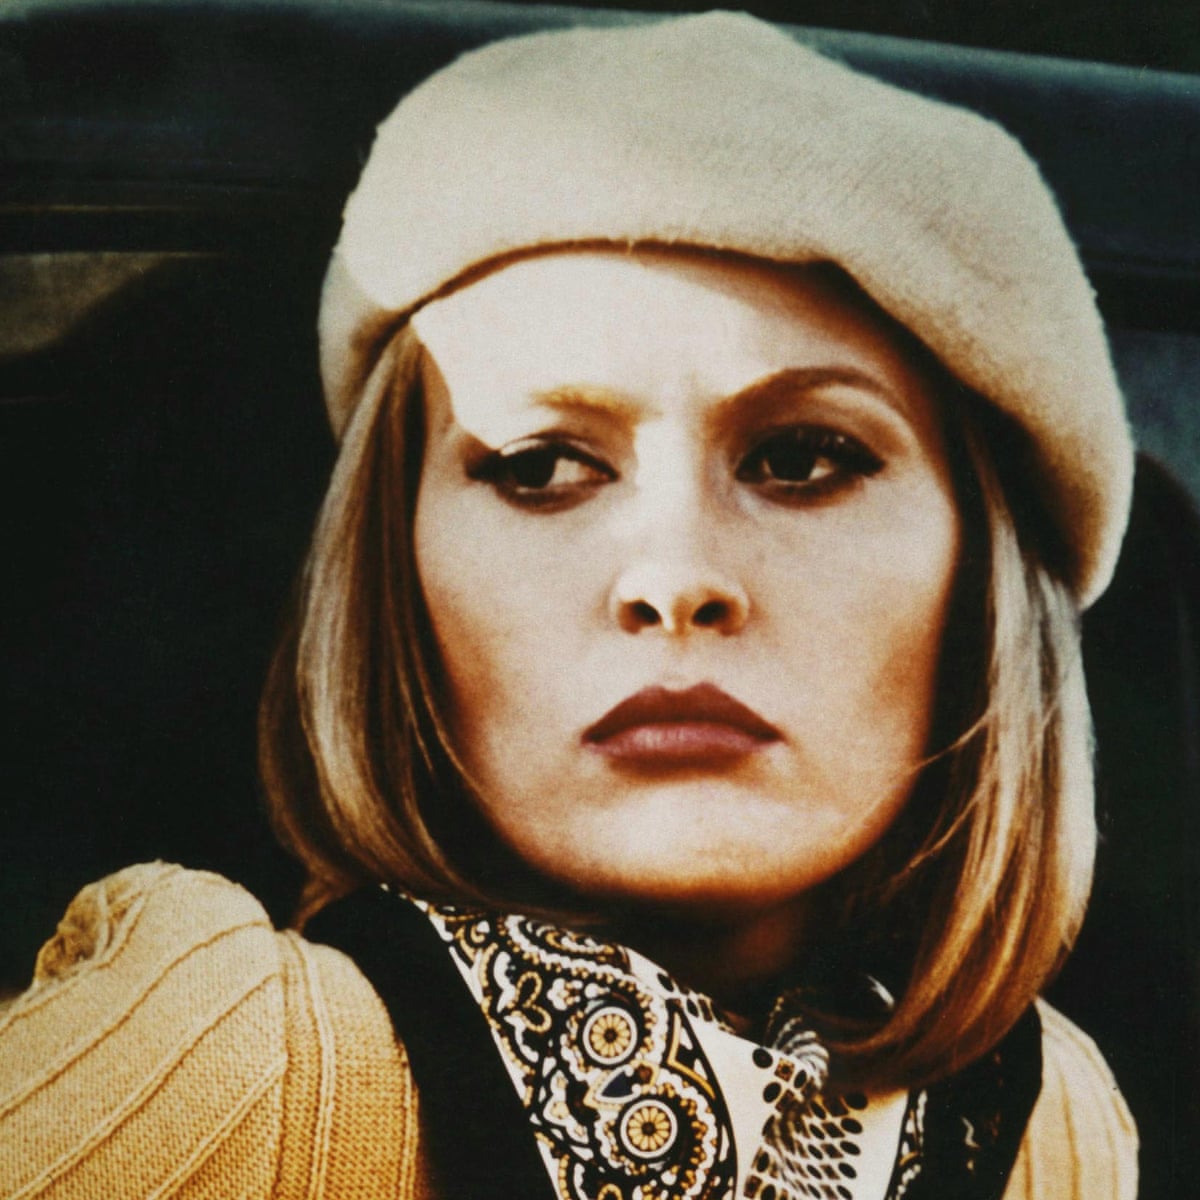 The style legacy of Bonnie Parker